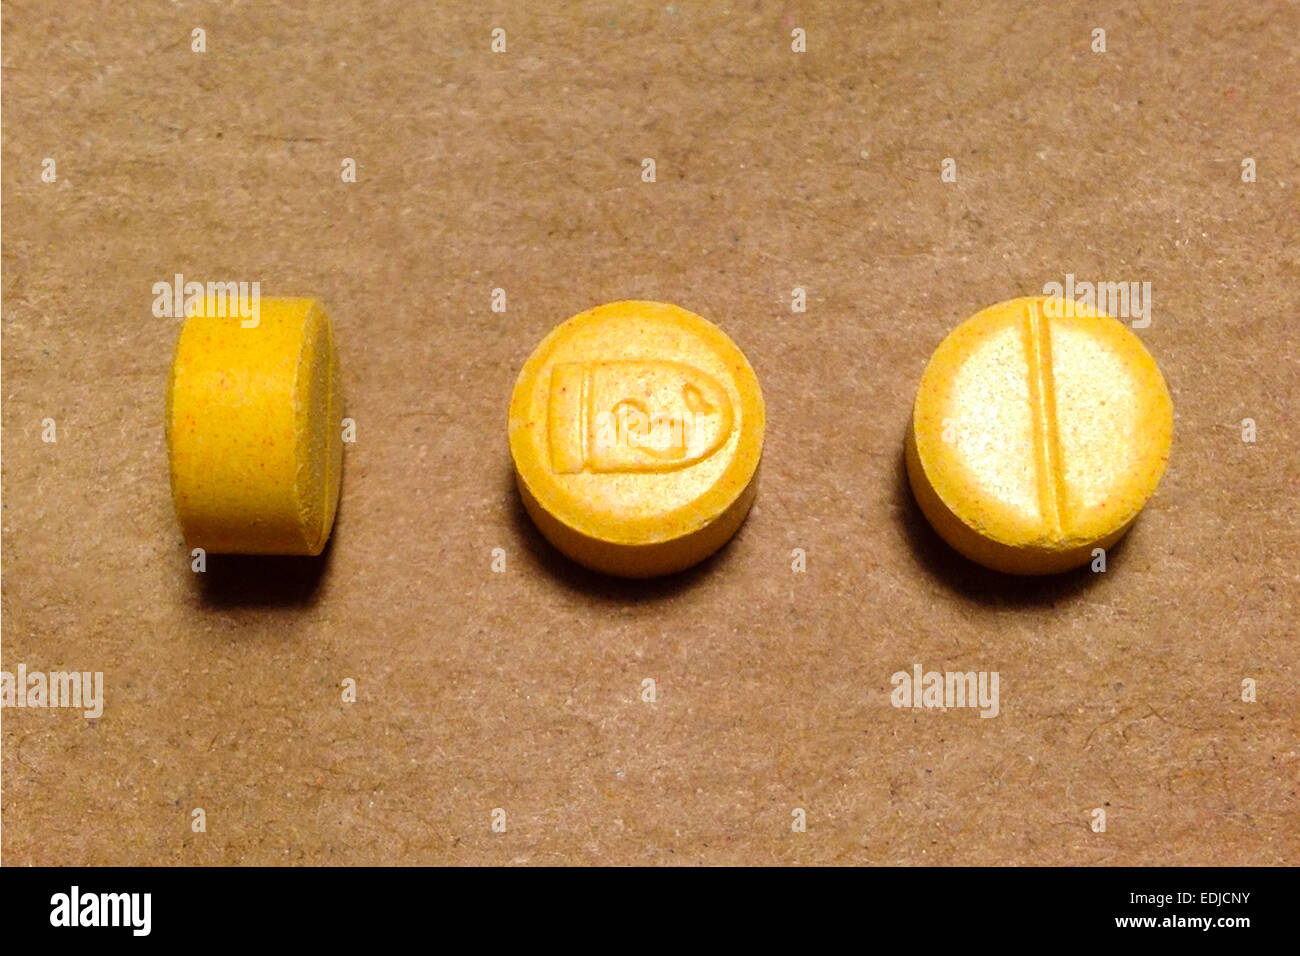 What is the long, yellow, oval pill with 200 on one side?